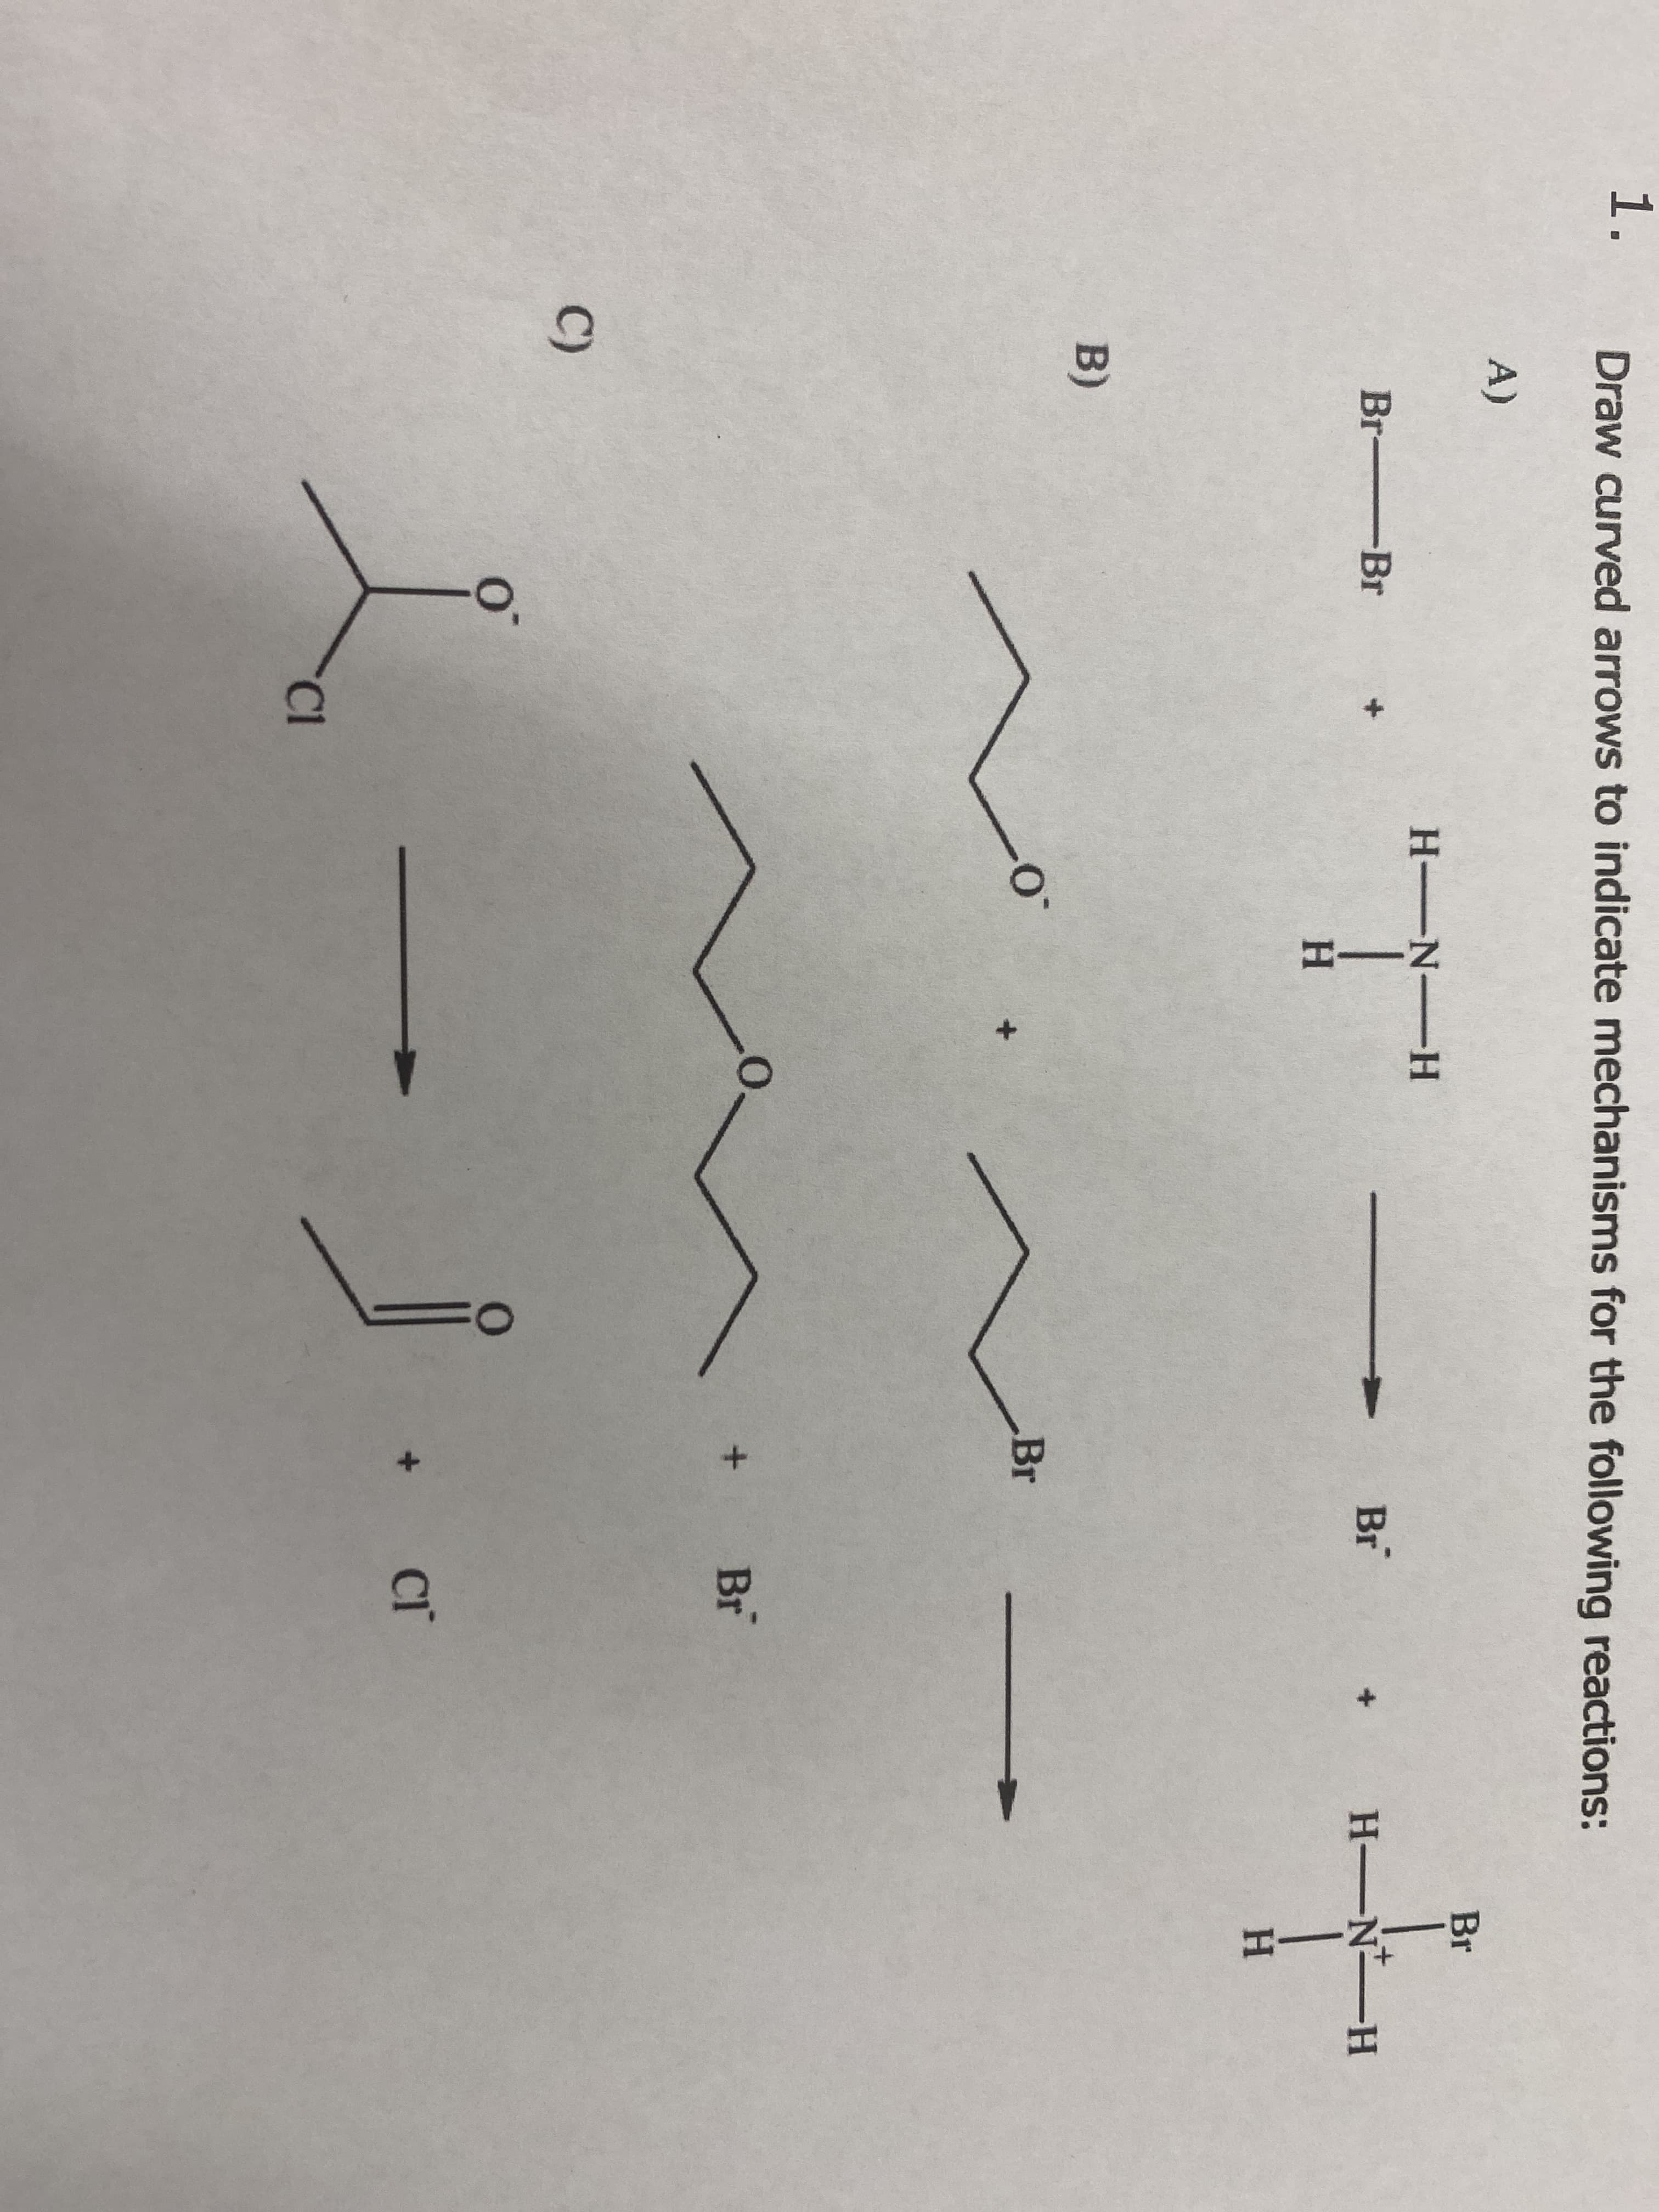 1.
Draw curved arrows to indicate mechanisms for the following reactions:
A)
Br
H N-H
Br Br
Br
H N H
H.
B)
Br
Br
C)
Cl
HINI
